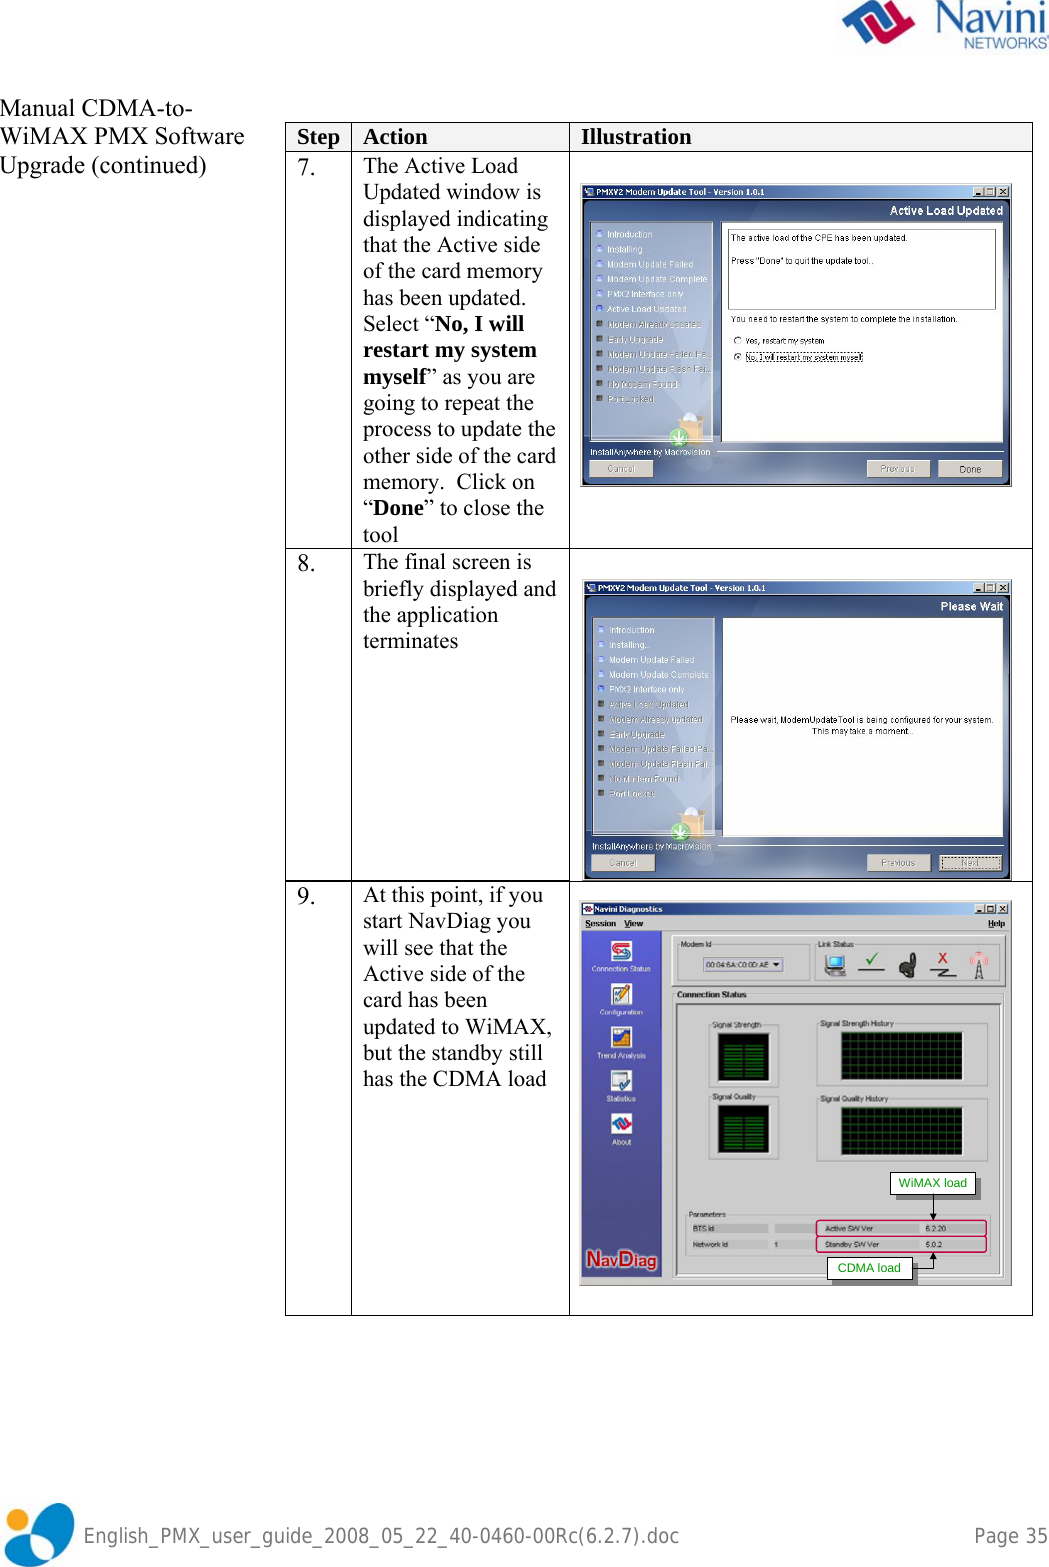               English_PMX_user_guide_2008_05_22_40-0460-00Rc(6.2.7).doc    Page 35 Manual CDMA-to-WiMAX PMX Software Upgrade (continued)   Step  Action  Illustration 7.  The Active Load Updated window is displayed indicating that the Active side of the card memory has been updated. Select “No, I will restart my system myself” as you are going to repeat the process to update the other side of the card memory.  Click on “Done” to close the tool  8.  The final screen is briefly displayed and the application terminates  9.  At this point, if you start NavDiag you will see that the Active side of the card has been updated to WiMAX, but the standby still has the CDMA load  WiMAX loadWiMAX loadCDMA loadCDMA loadWiMAX loadWiMAX loadCDMA loadCDMA load